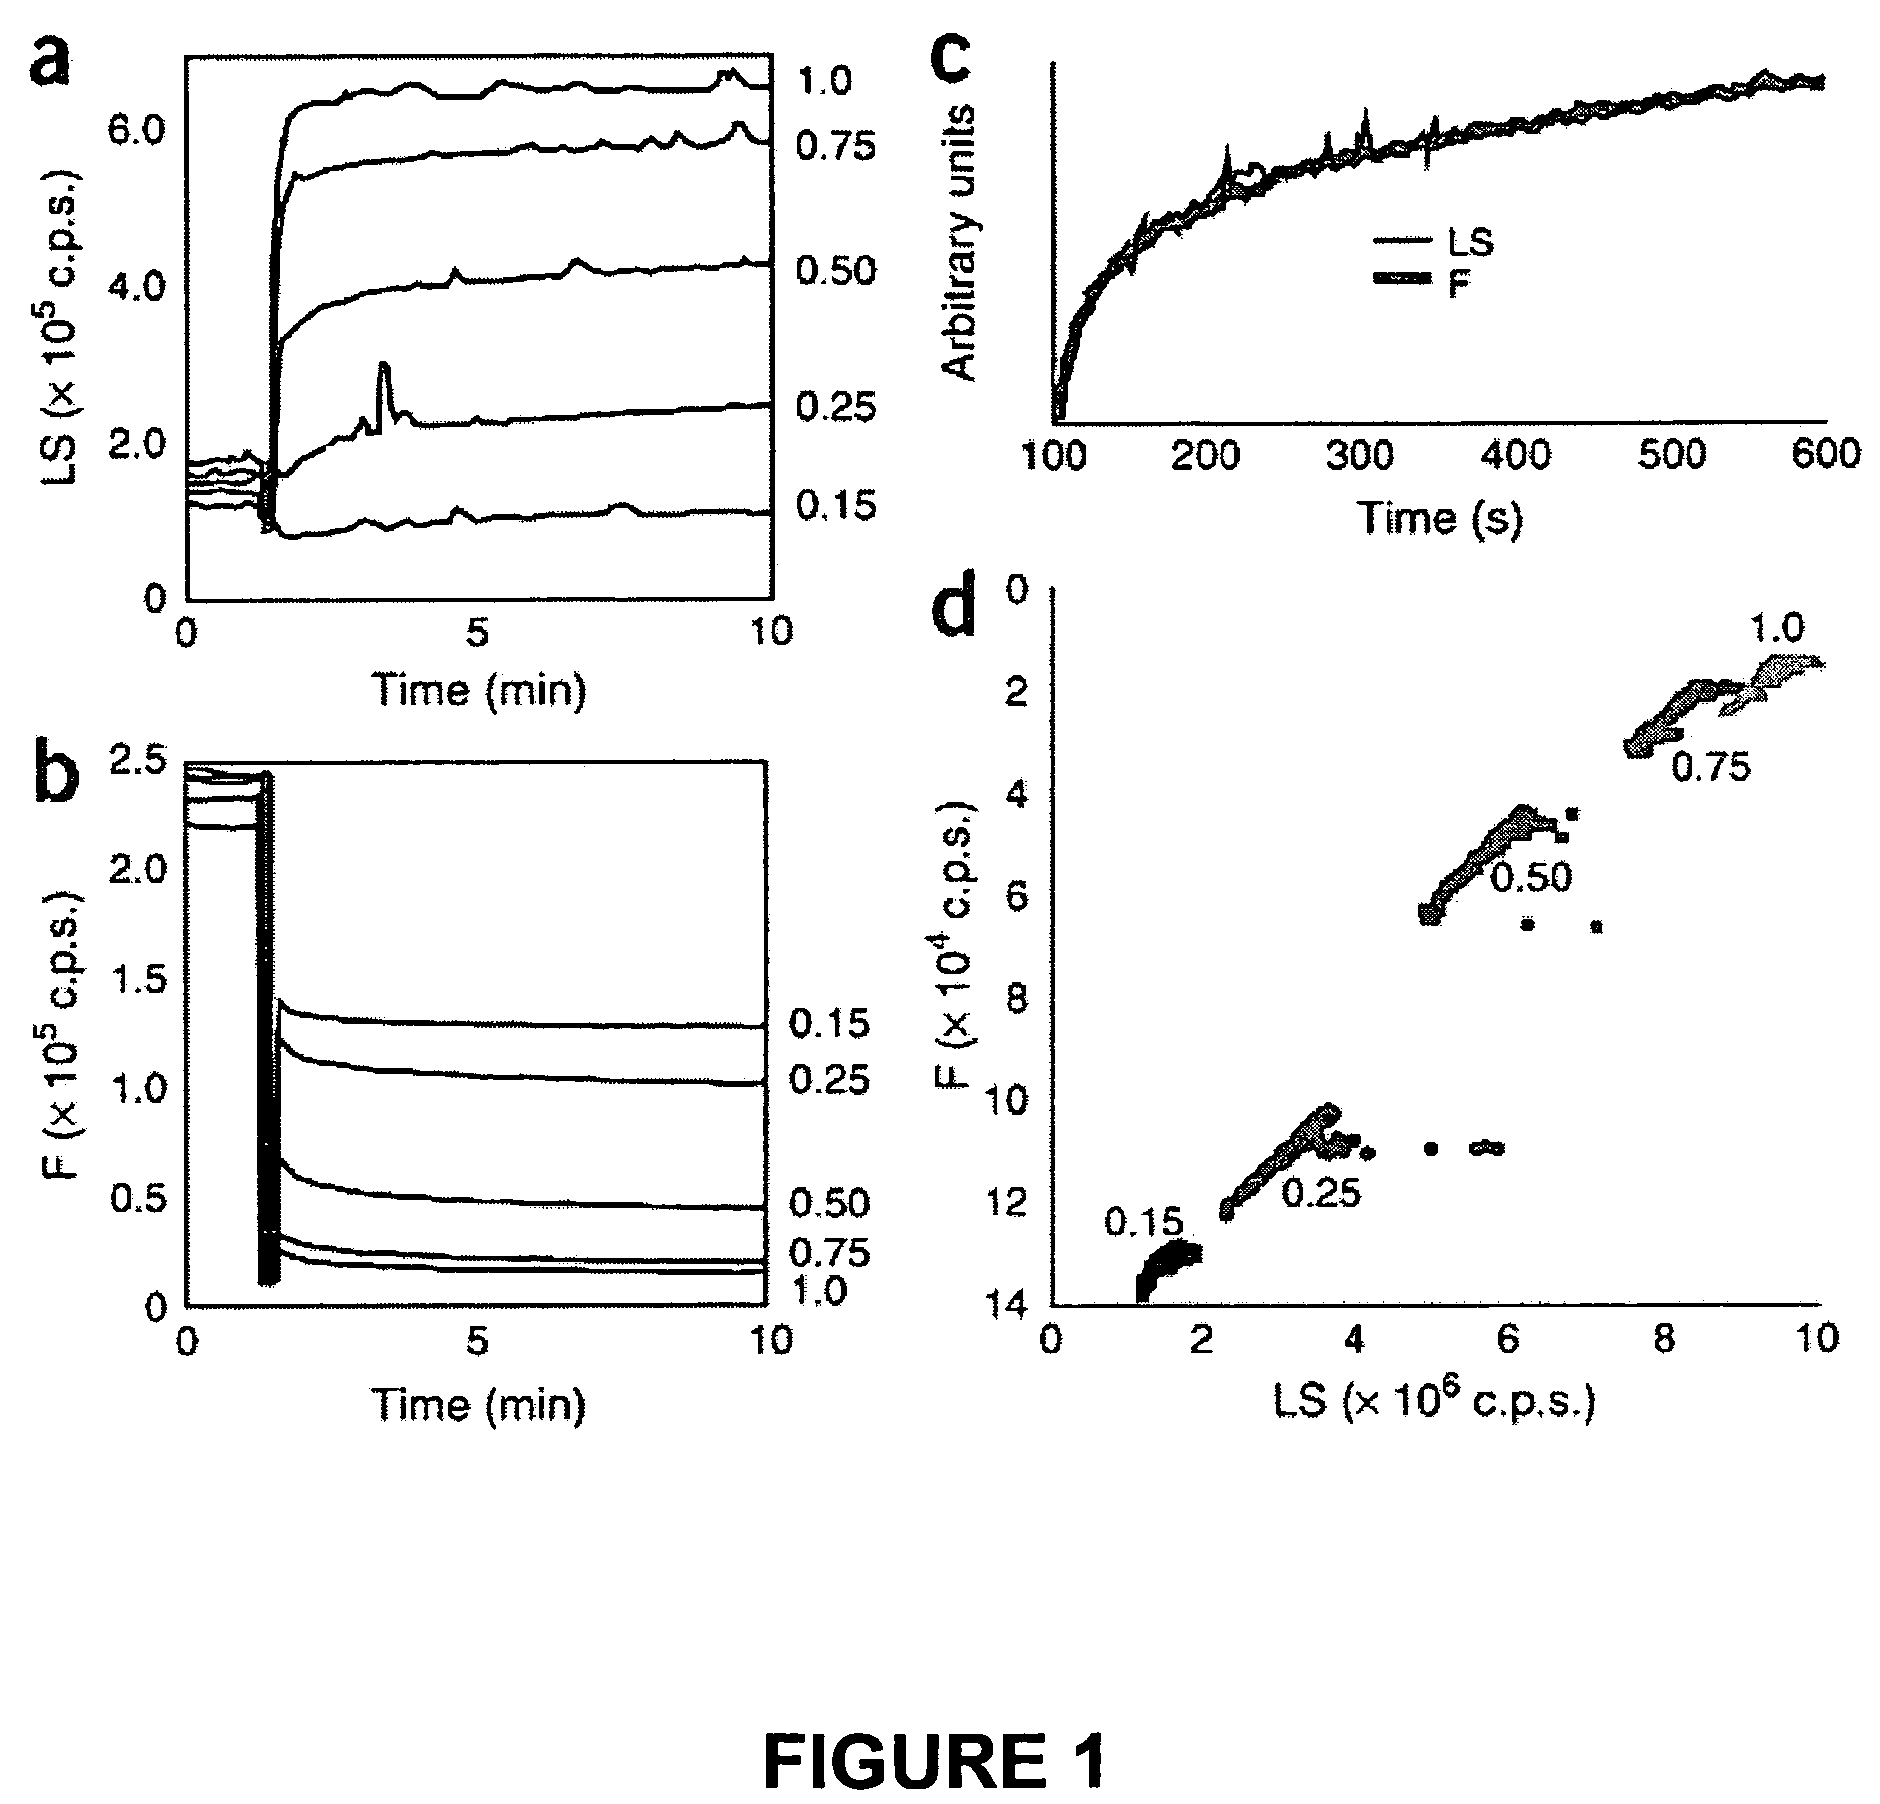 Methods for detecting compounds that interfere with protein aggregation utilizing an in vitro fluorescence-based assay